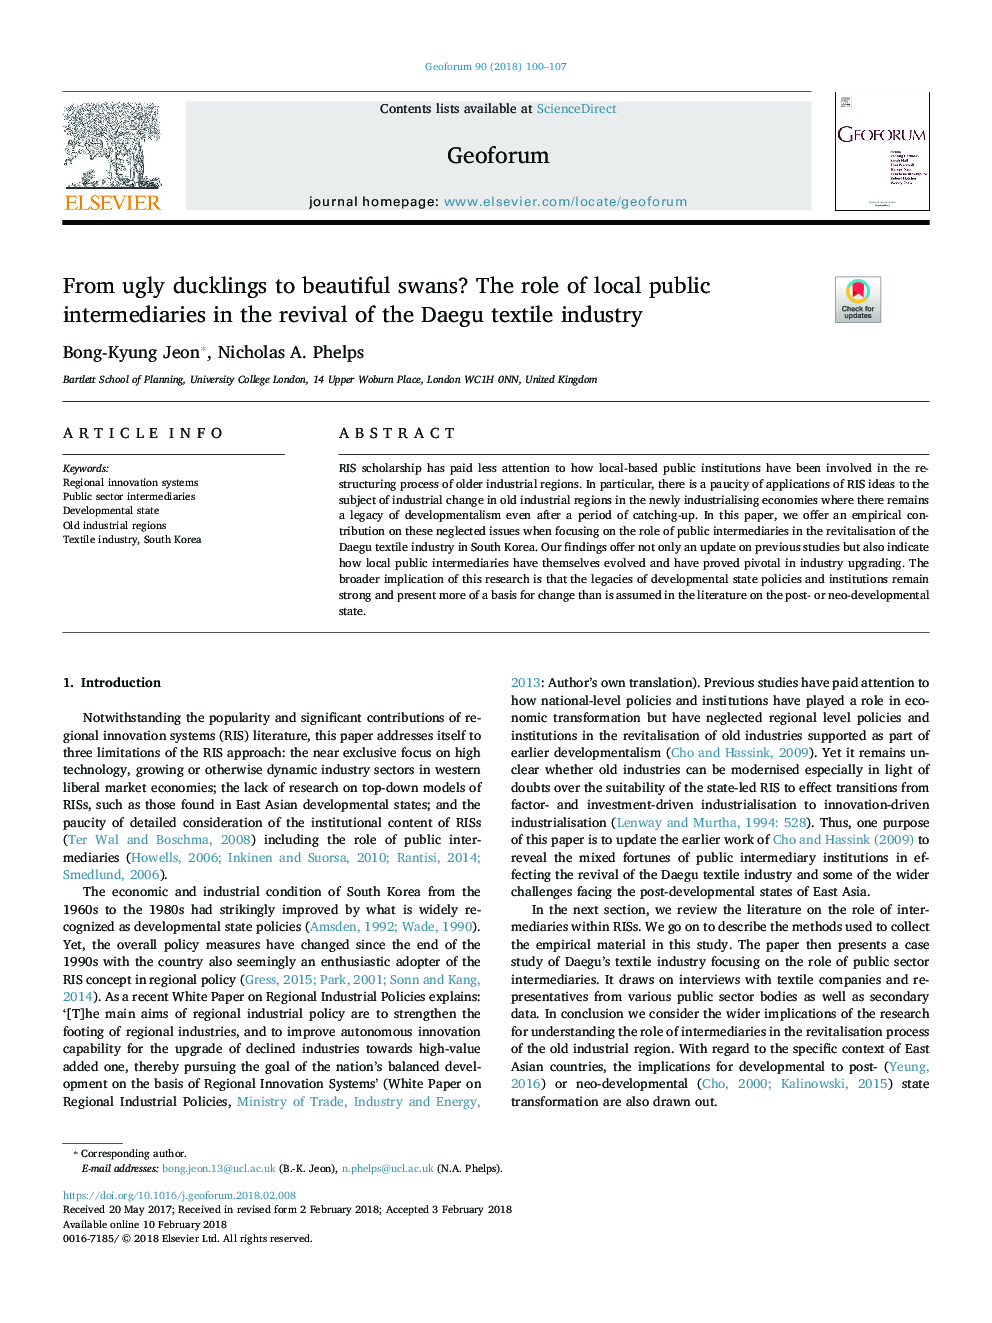 From ugly ducklings to beautiful swans? The role of local public intermediaries in the revival of the Daegu textile industry